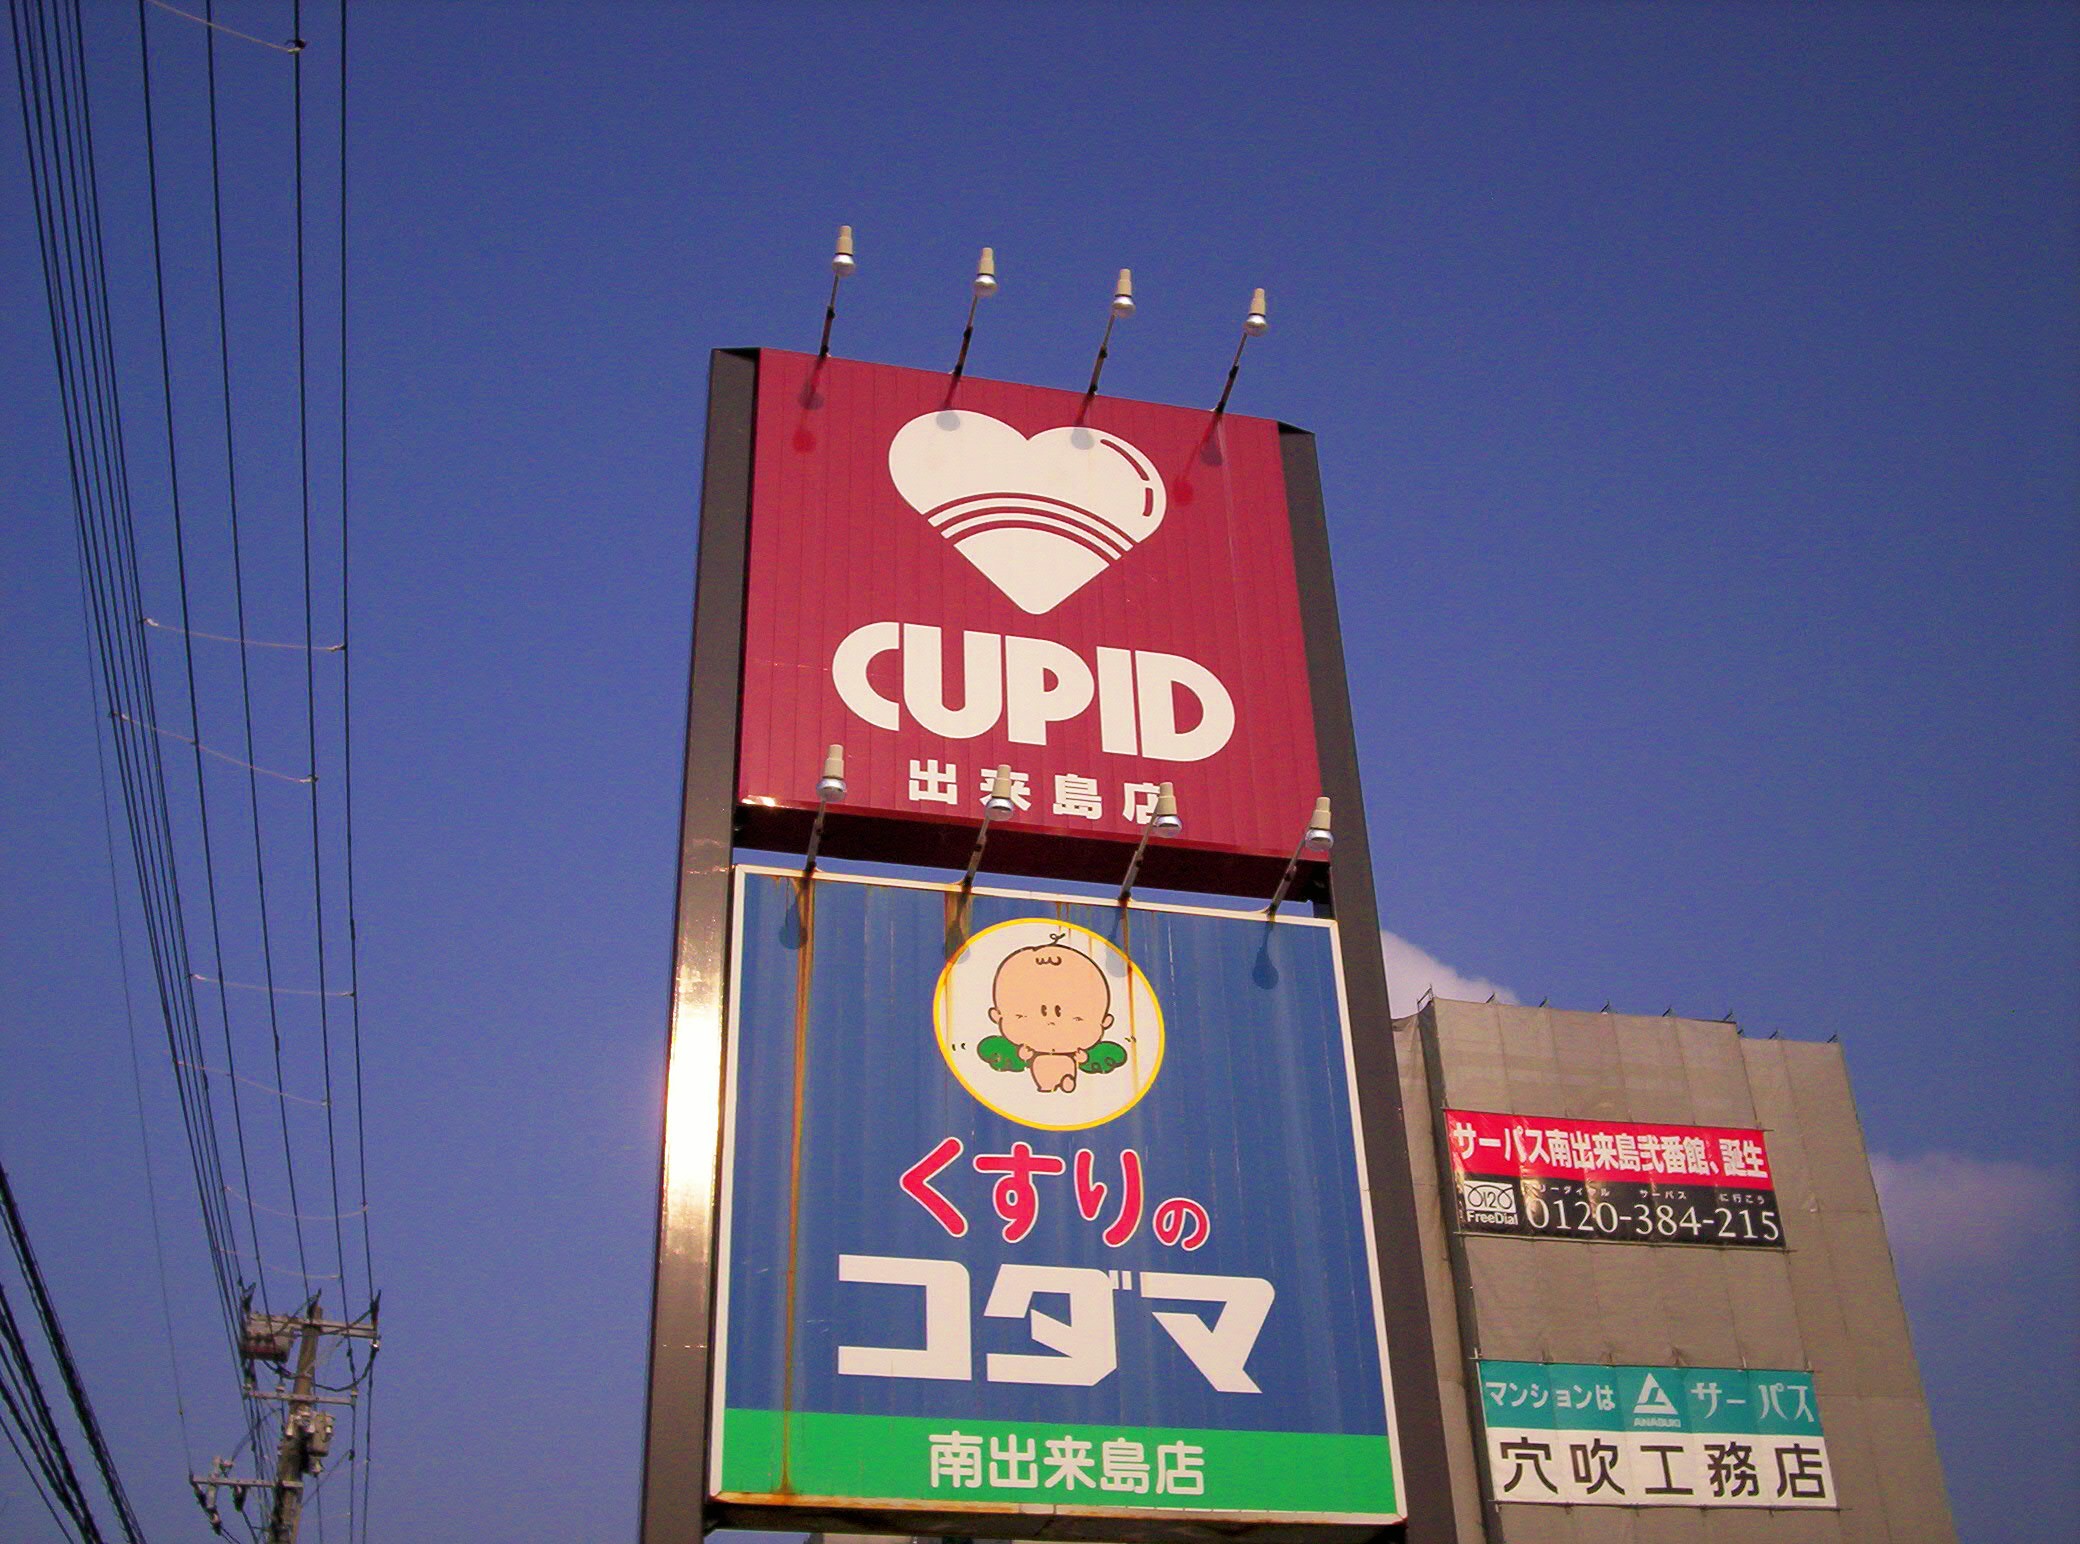 Cupid is the supermarket where I shop nearly every day. Son of Mercury and Venus, the Roman god of love. Notice the big heart!